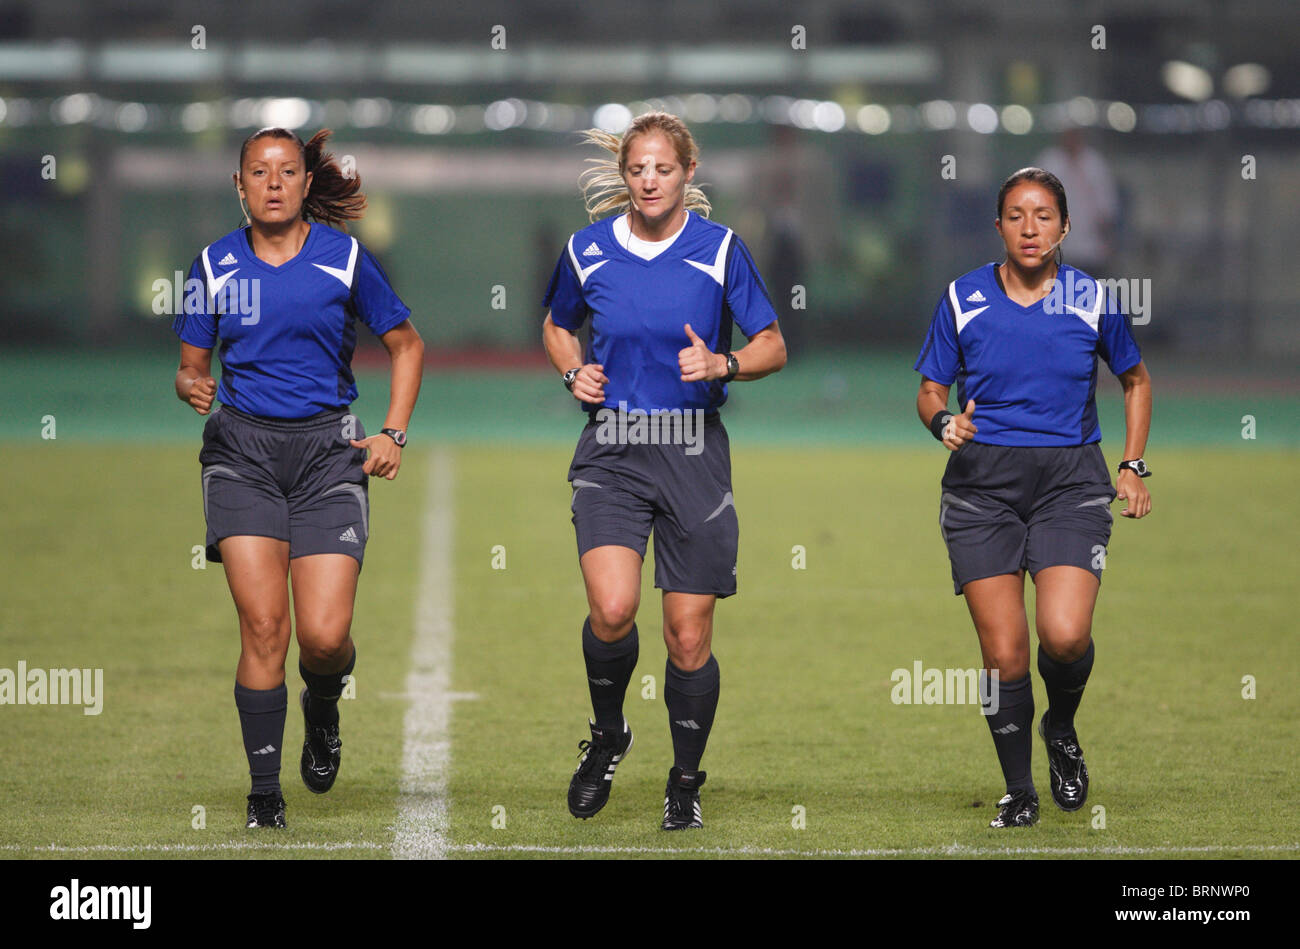 Referee Jennifer Bennett (c) warms up with her assistants prior to a 2007 Women's World Cup match between China and Brazil. Stock Photo